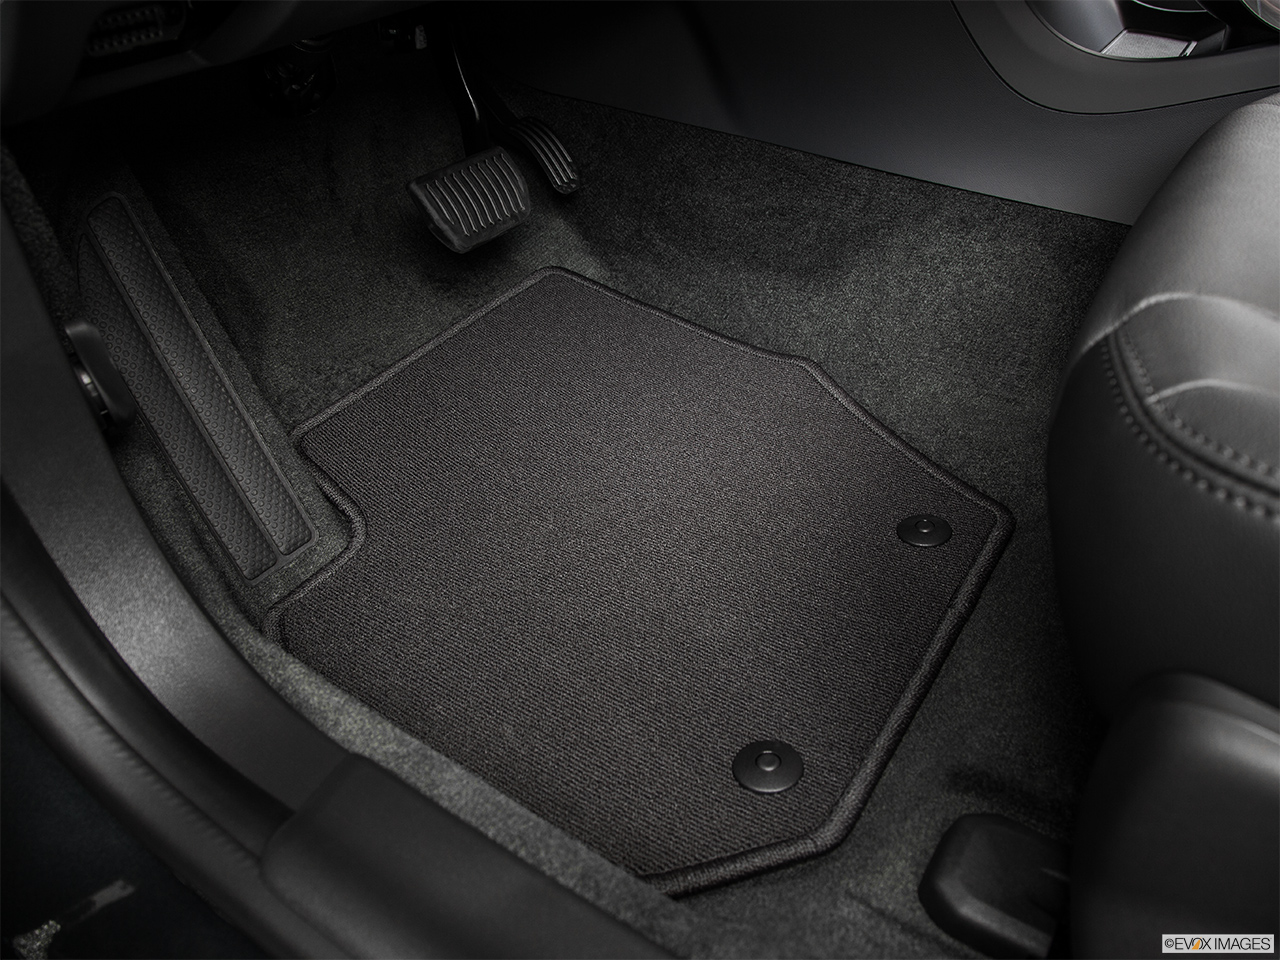 2015 Volvo S60 Premier Driver's floor mat and pedals. Mid-seat level from outside looking in. 